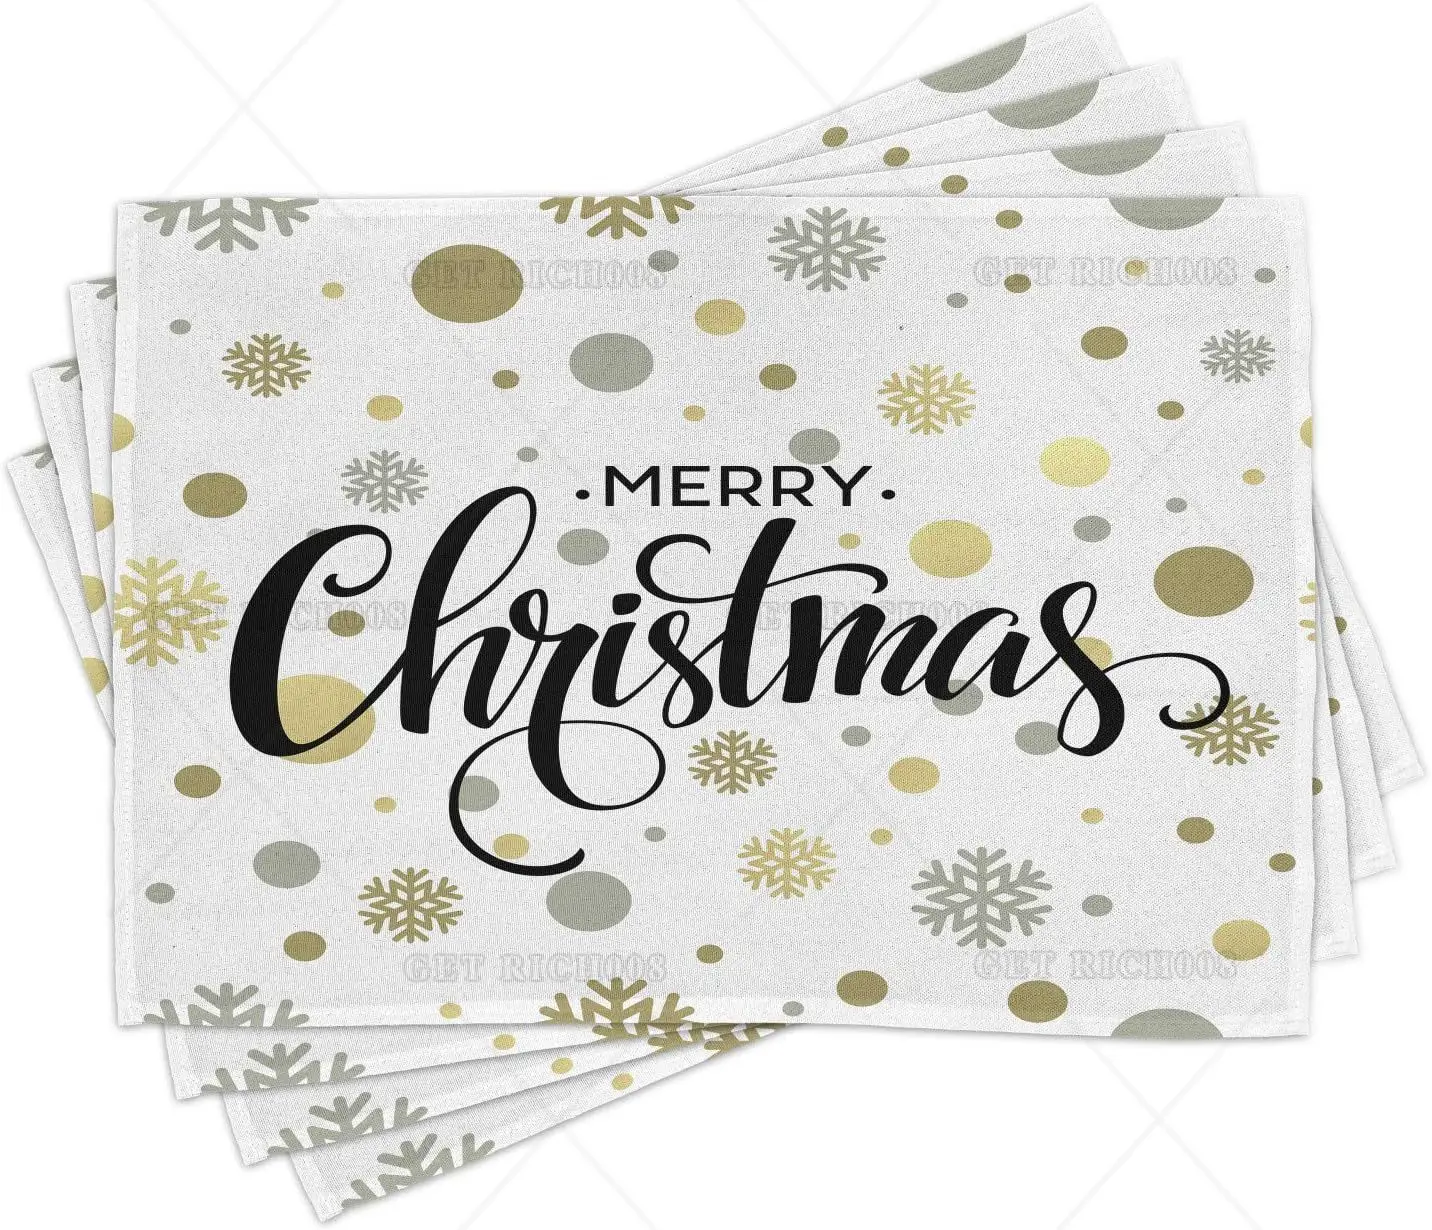 

Christmas Place Mats Set of 4 Merry Christmas Lettering on An Abstract Modern Snowflake Dot Pattern Washable Fabric Placemats